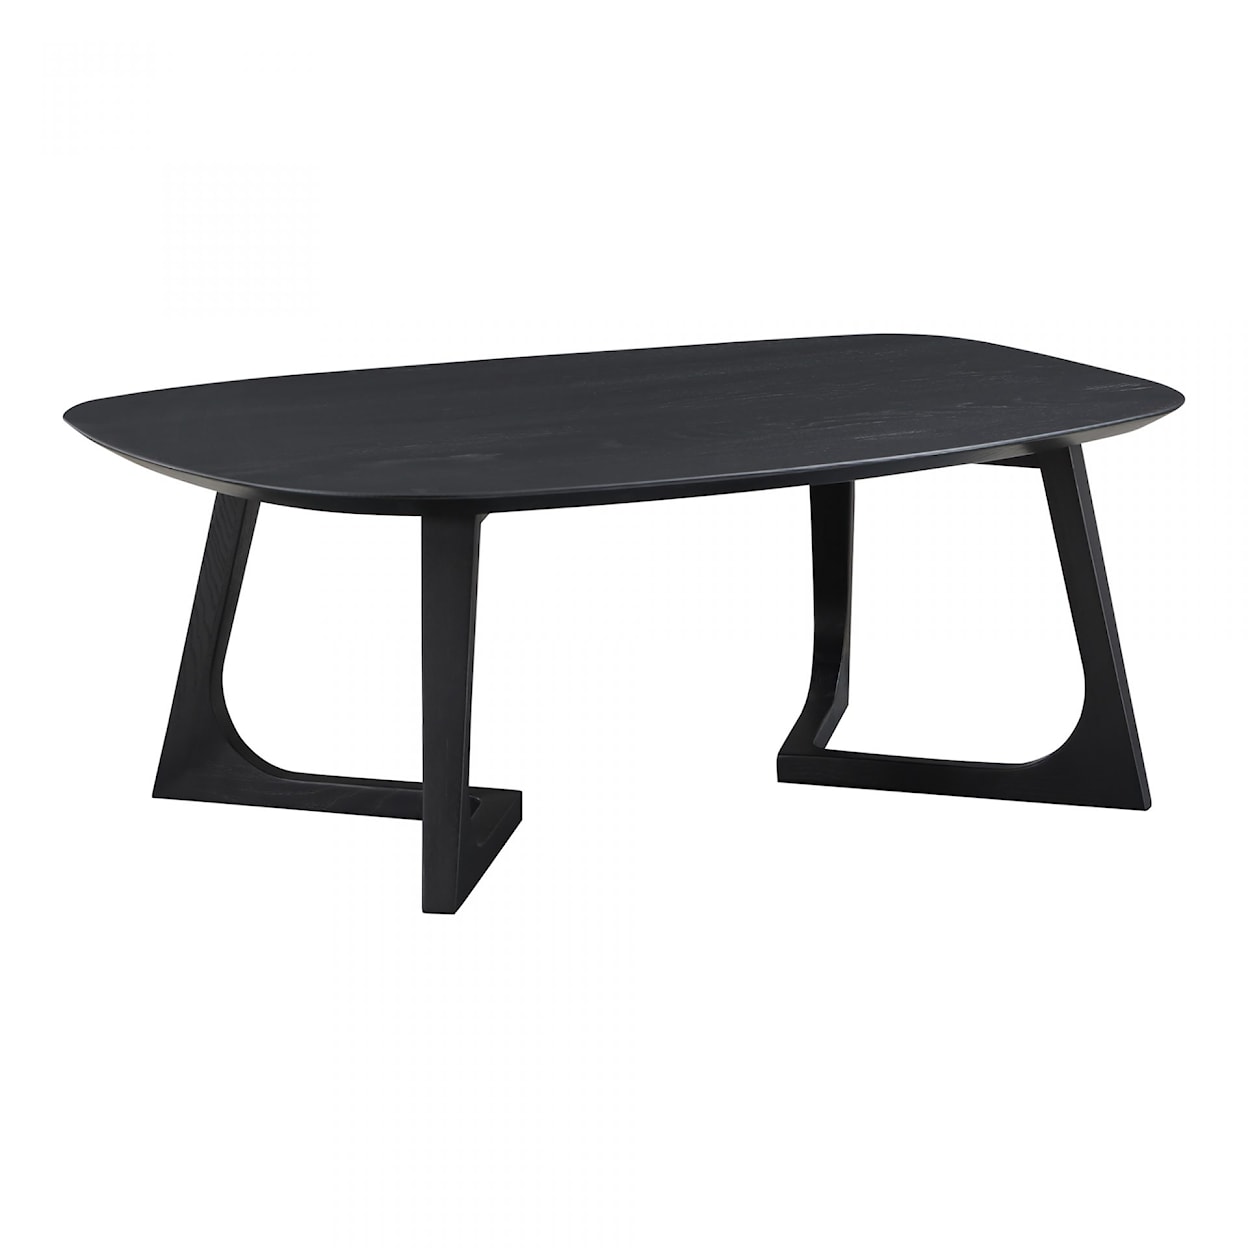 Moe's Home Collection Godenza Coffee Table